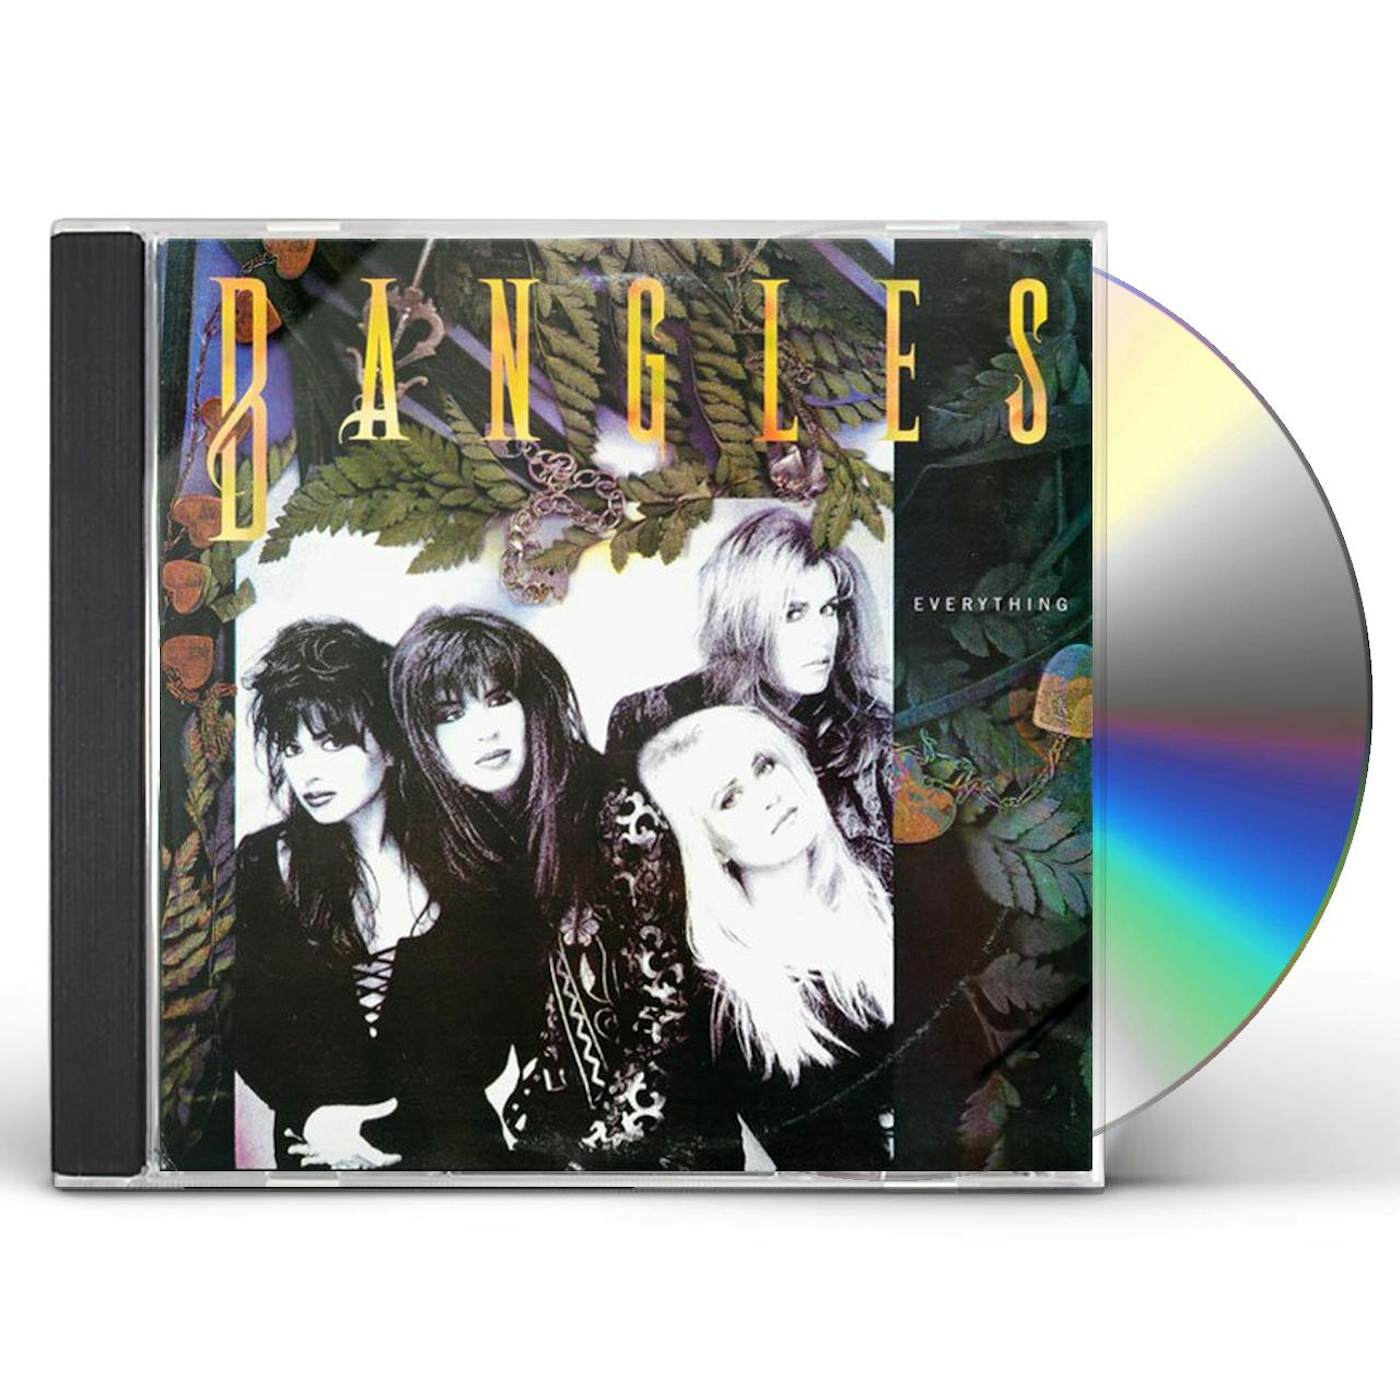 The Bangles EVERYTHING CD